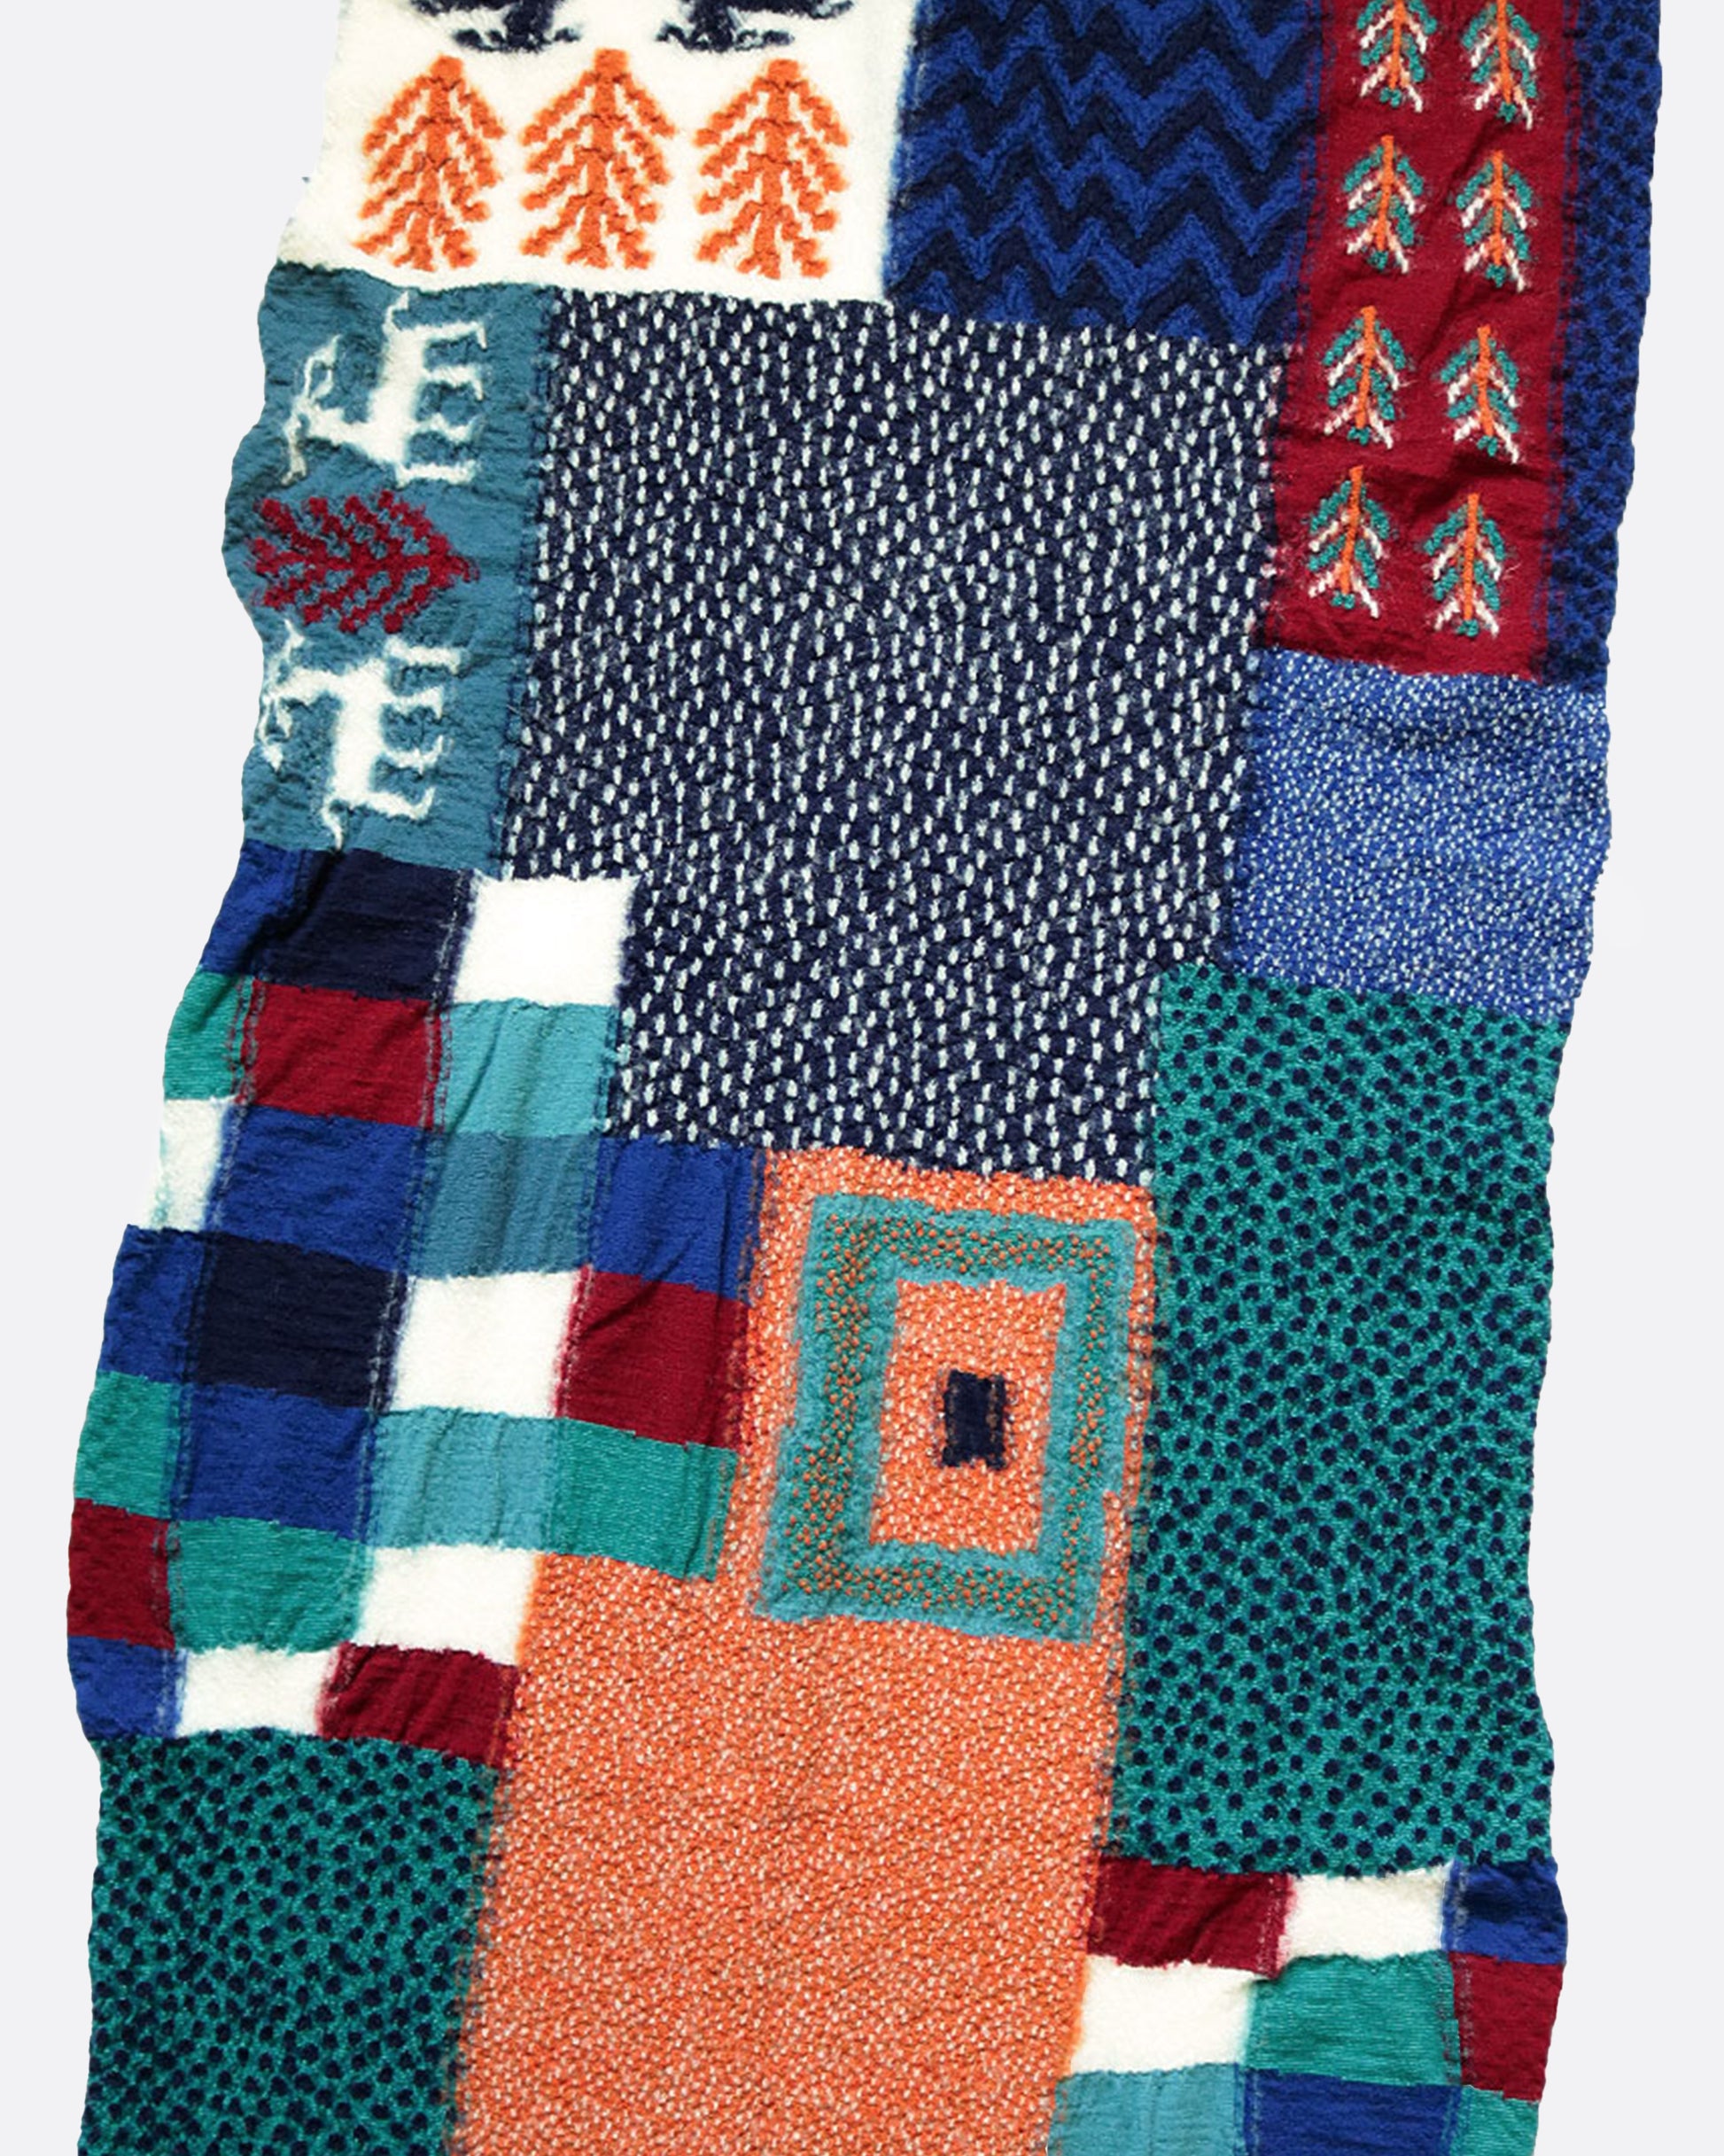 Inspired by different patterns found in gabbeh carpets, this time in shades of blue, red and peach.